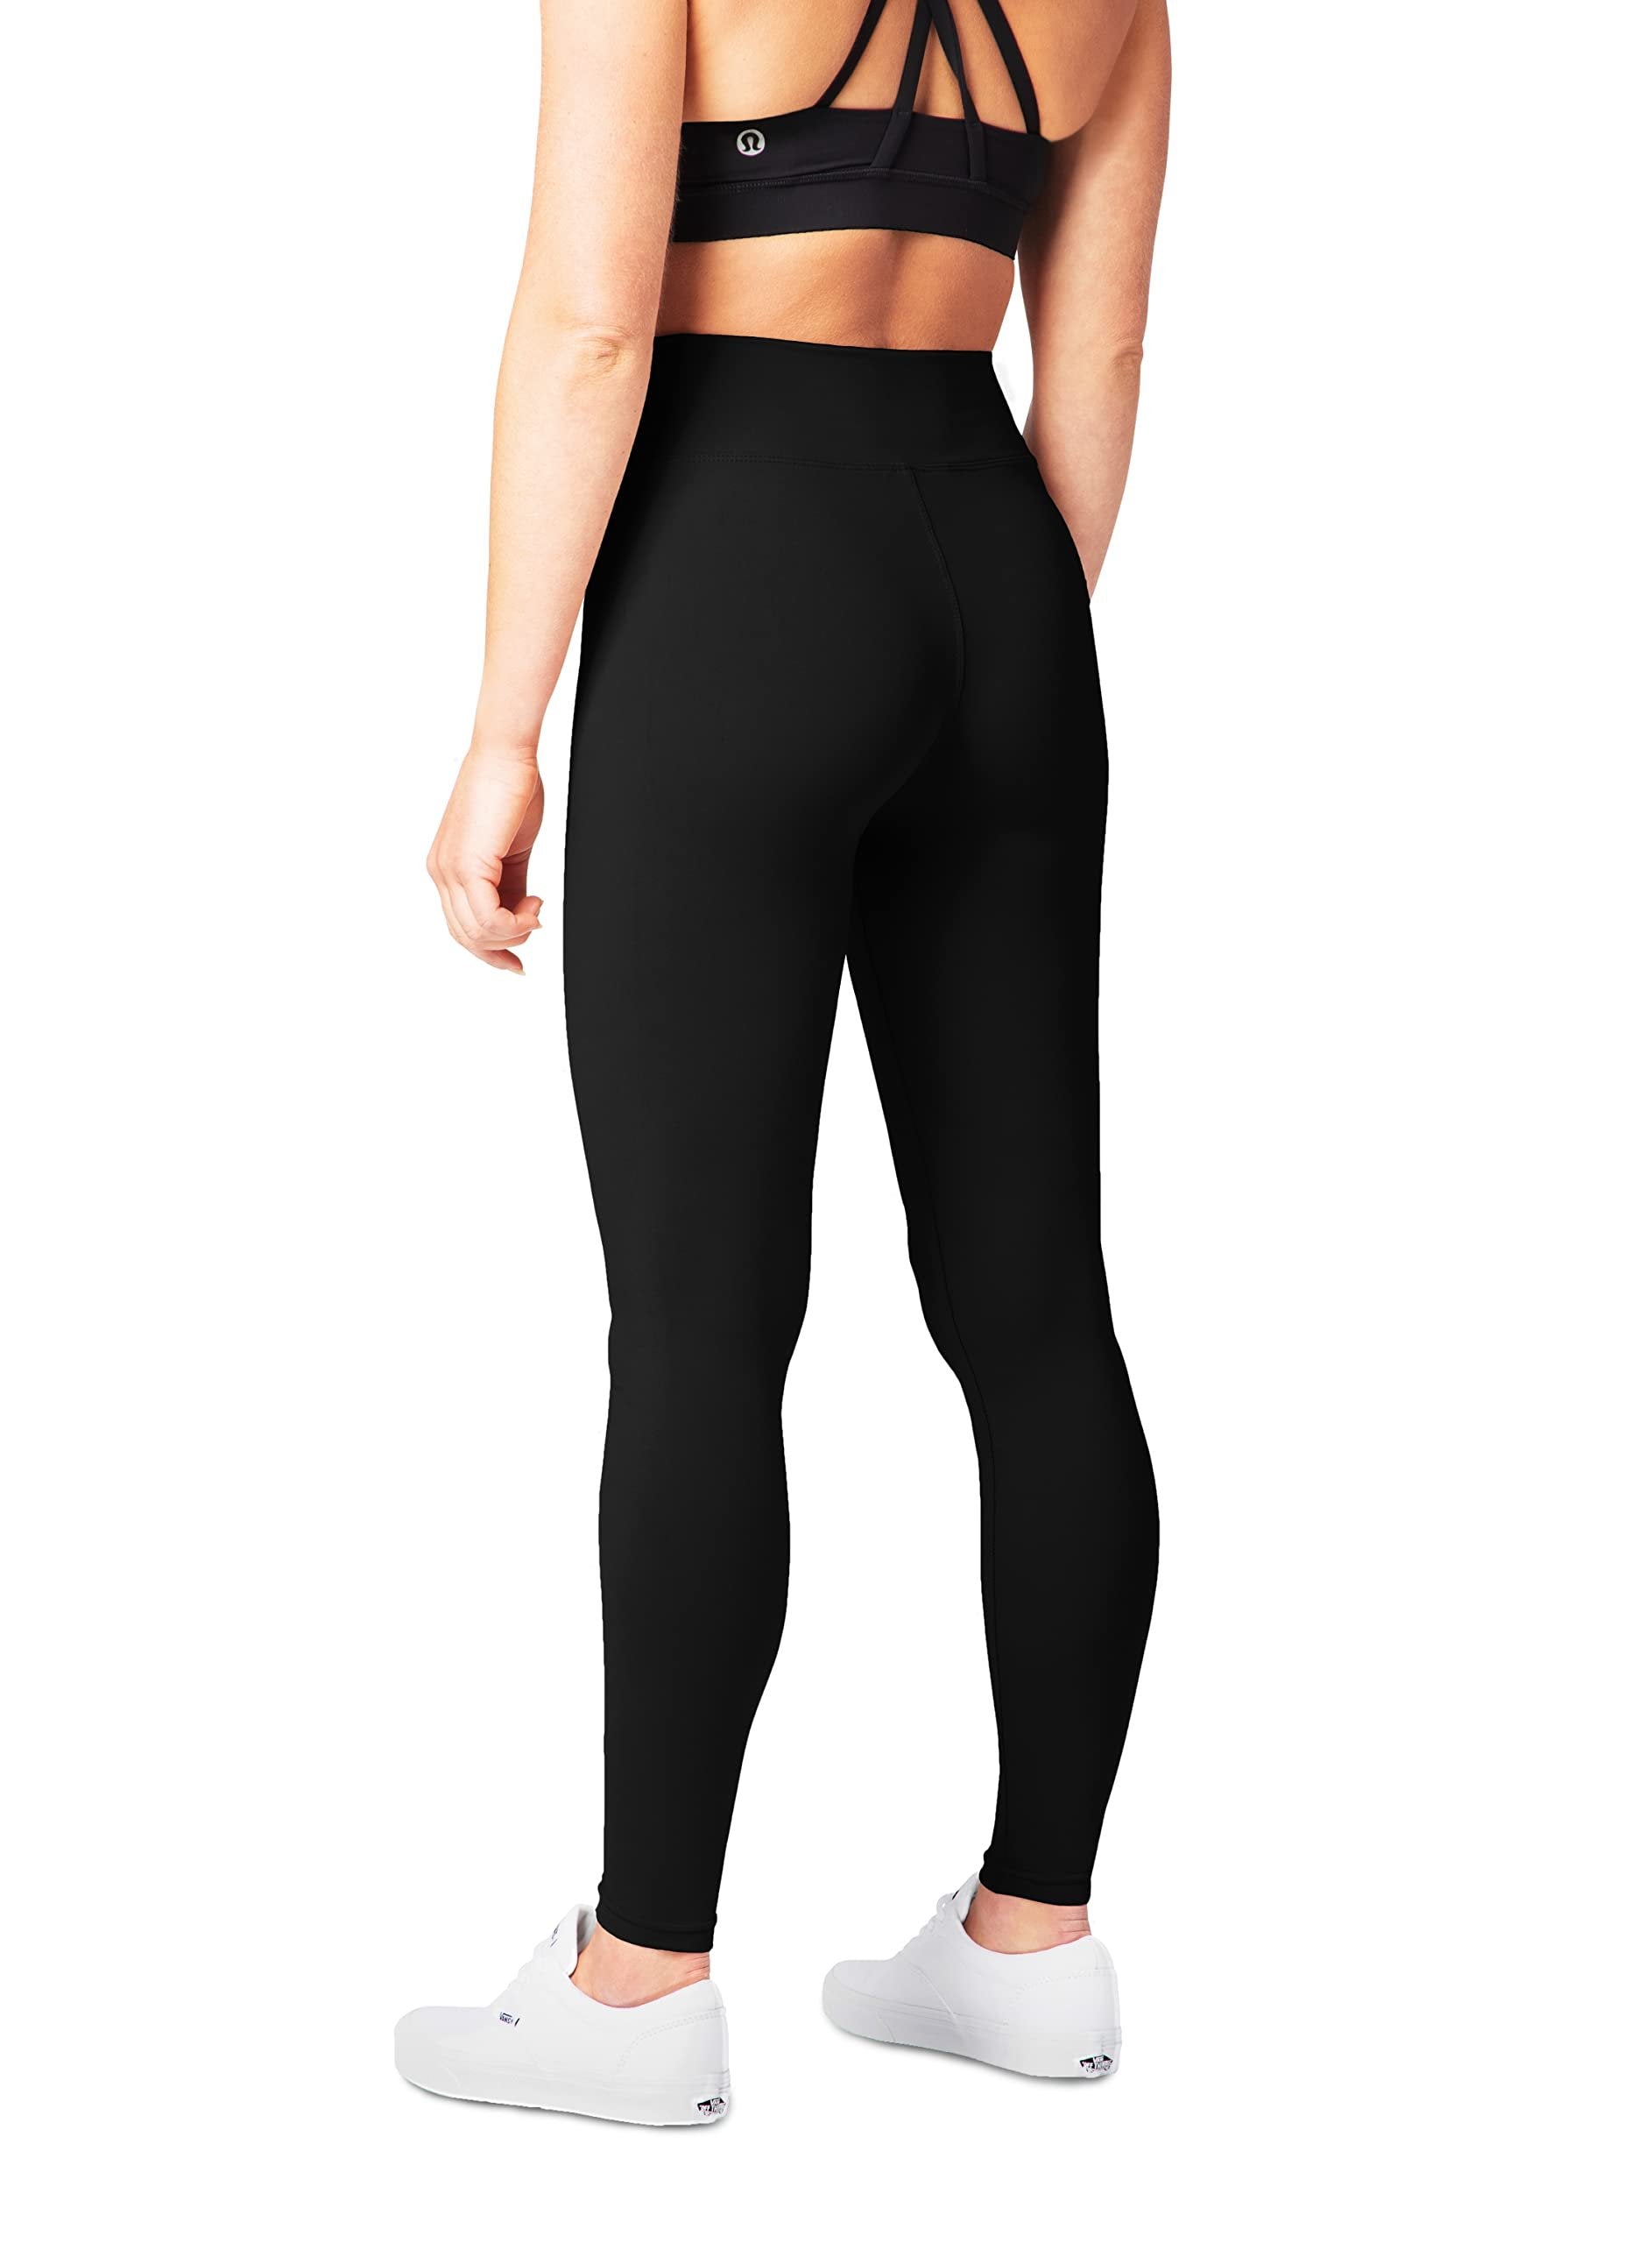 SATINA High Waisted Leggings for Women - Capri, Full Length, with Pockets,  Ribbed, Tummy Control & Joggers